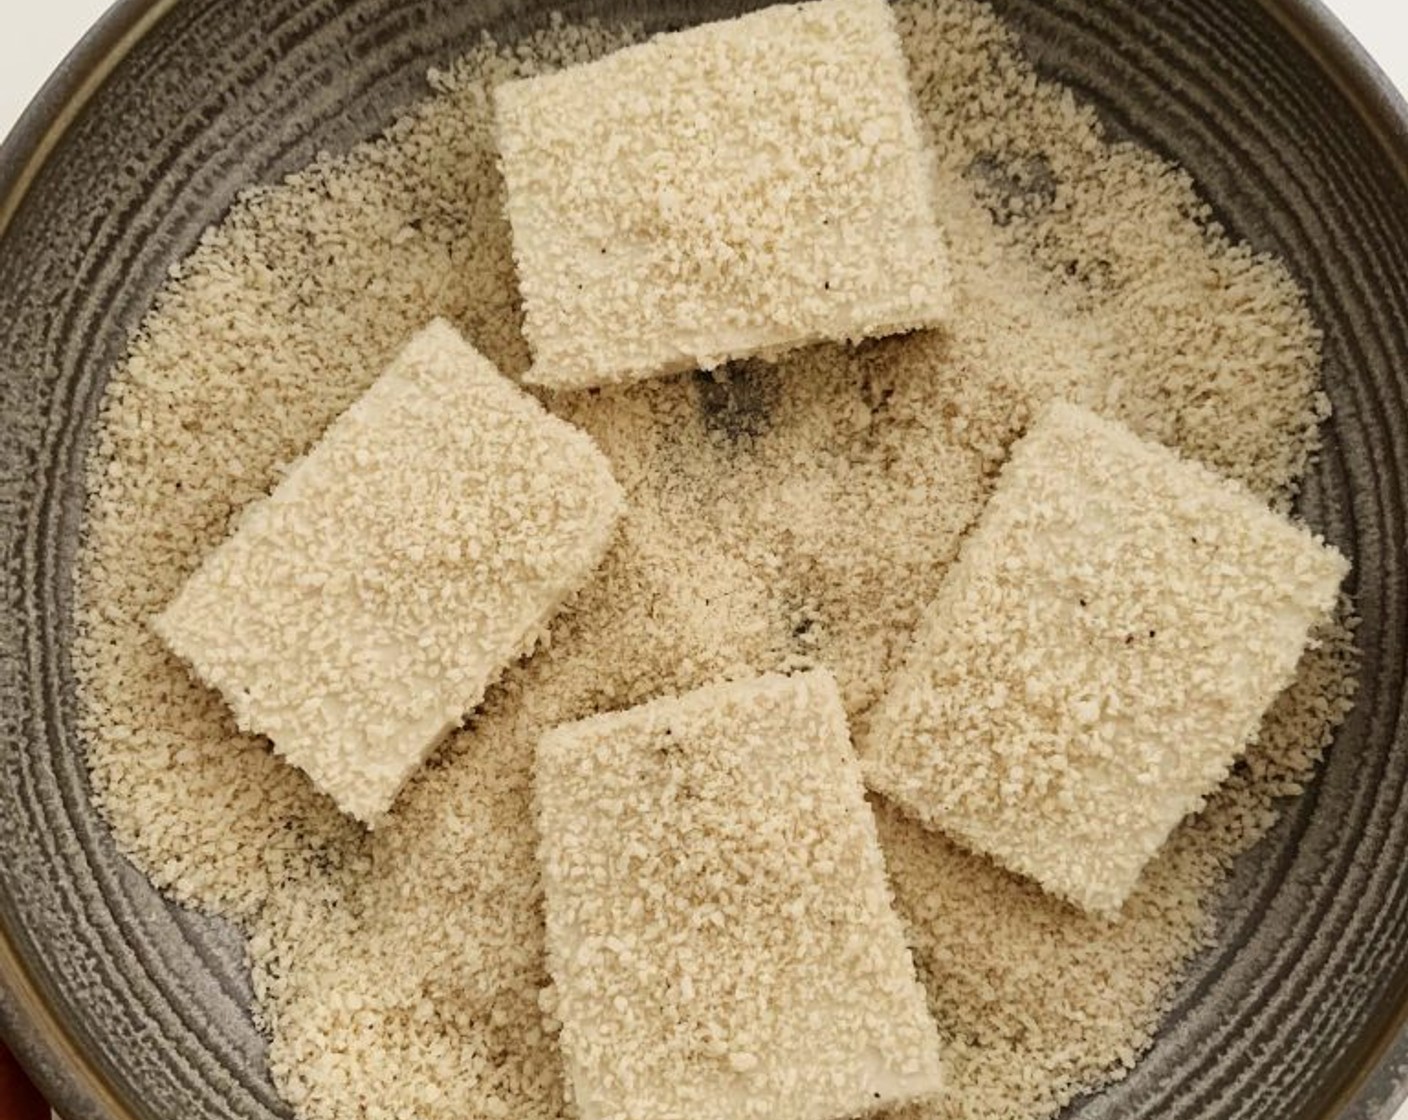 step 3 Then, place the Tofu into the bowl of the breadcrumb mixture and coat evenly on both sides.